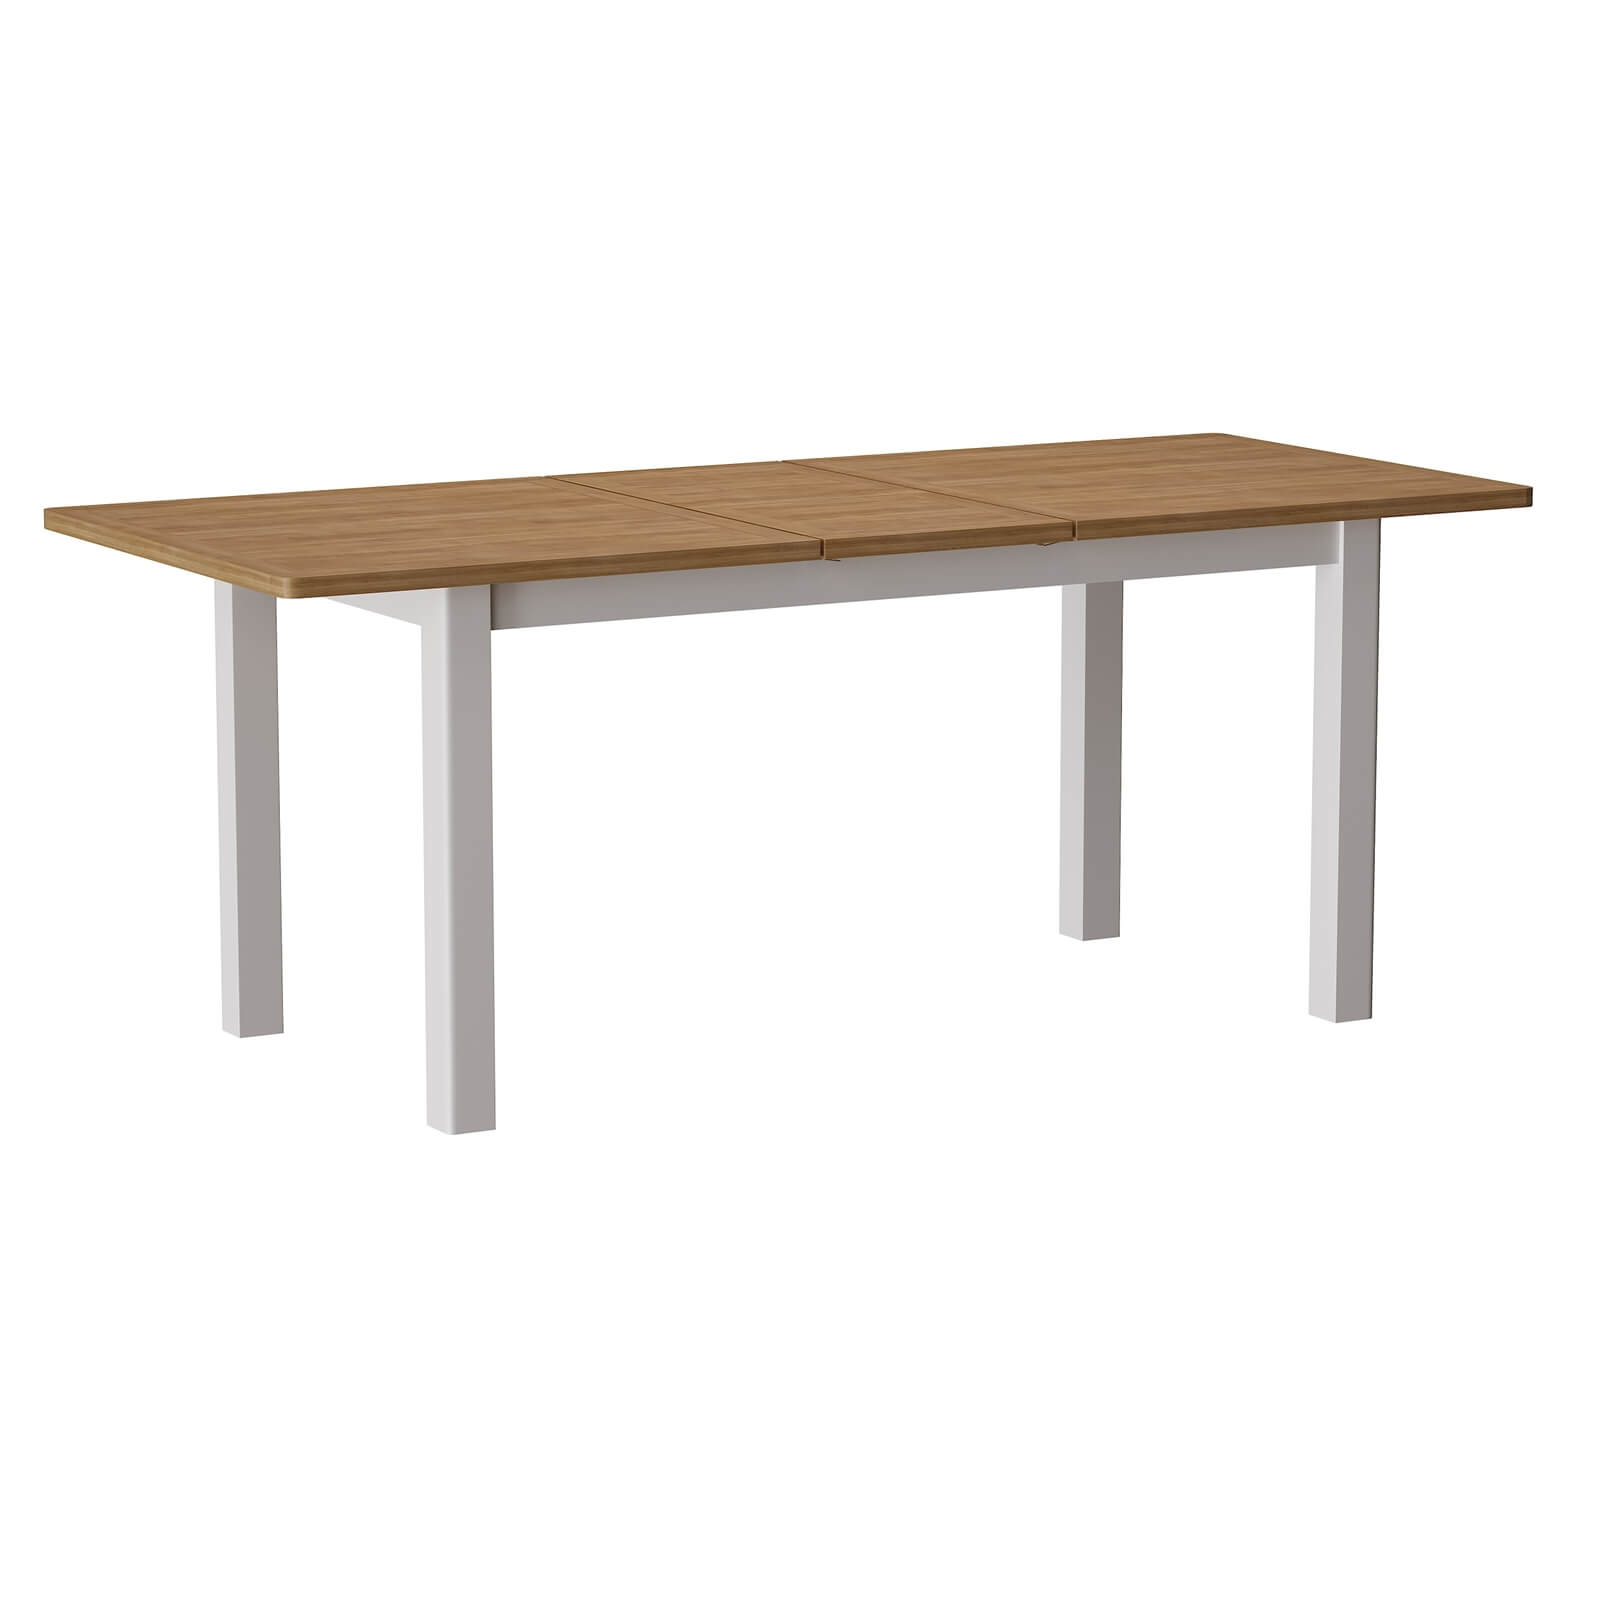 Padstow 1.6m Extending Dining Table - Truffle